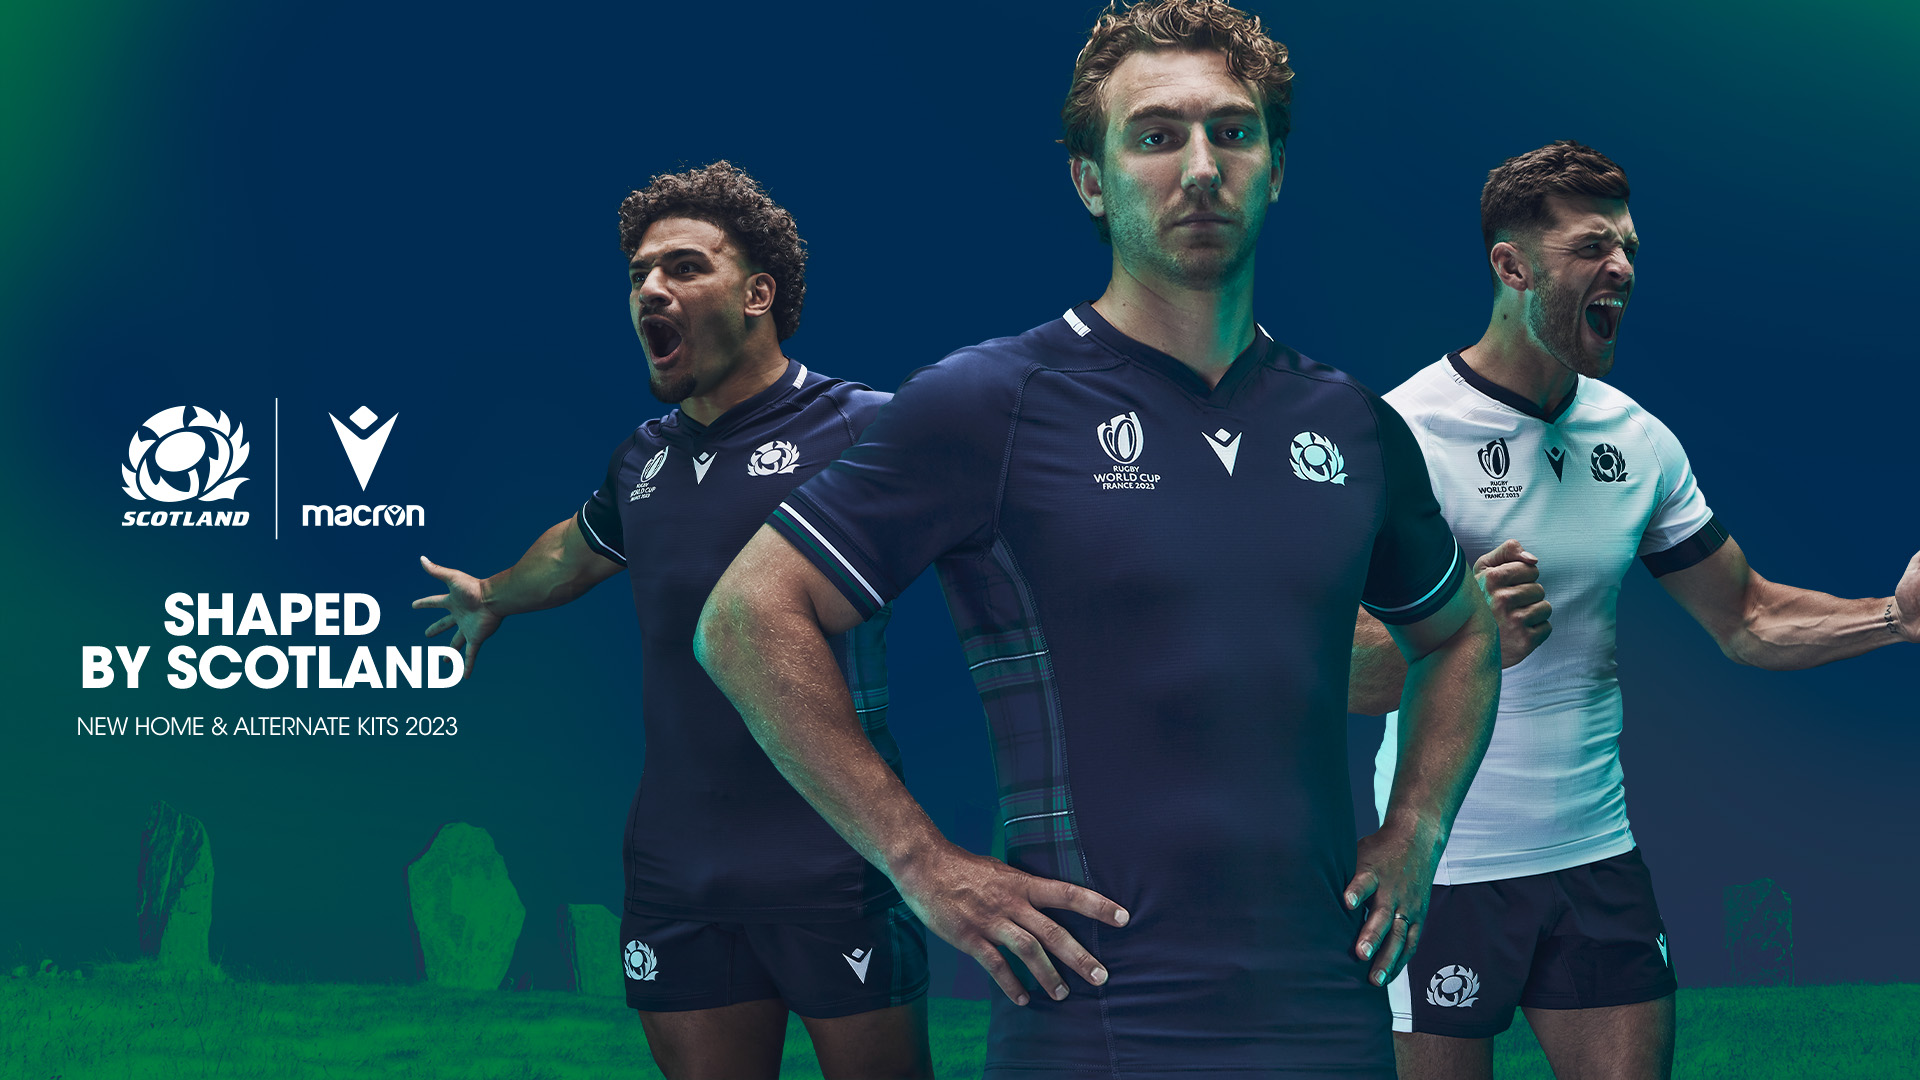 Scotland unveils Rugby World Cup kits made from recycled bottles ...